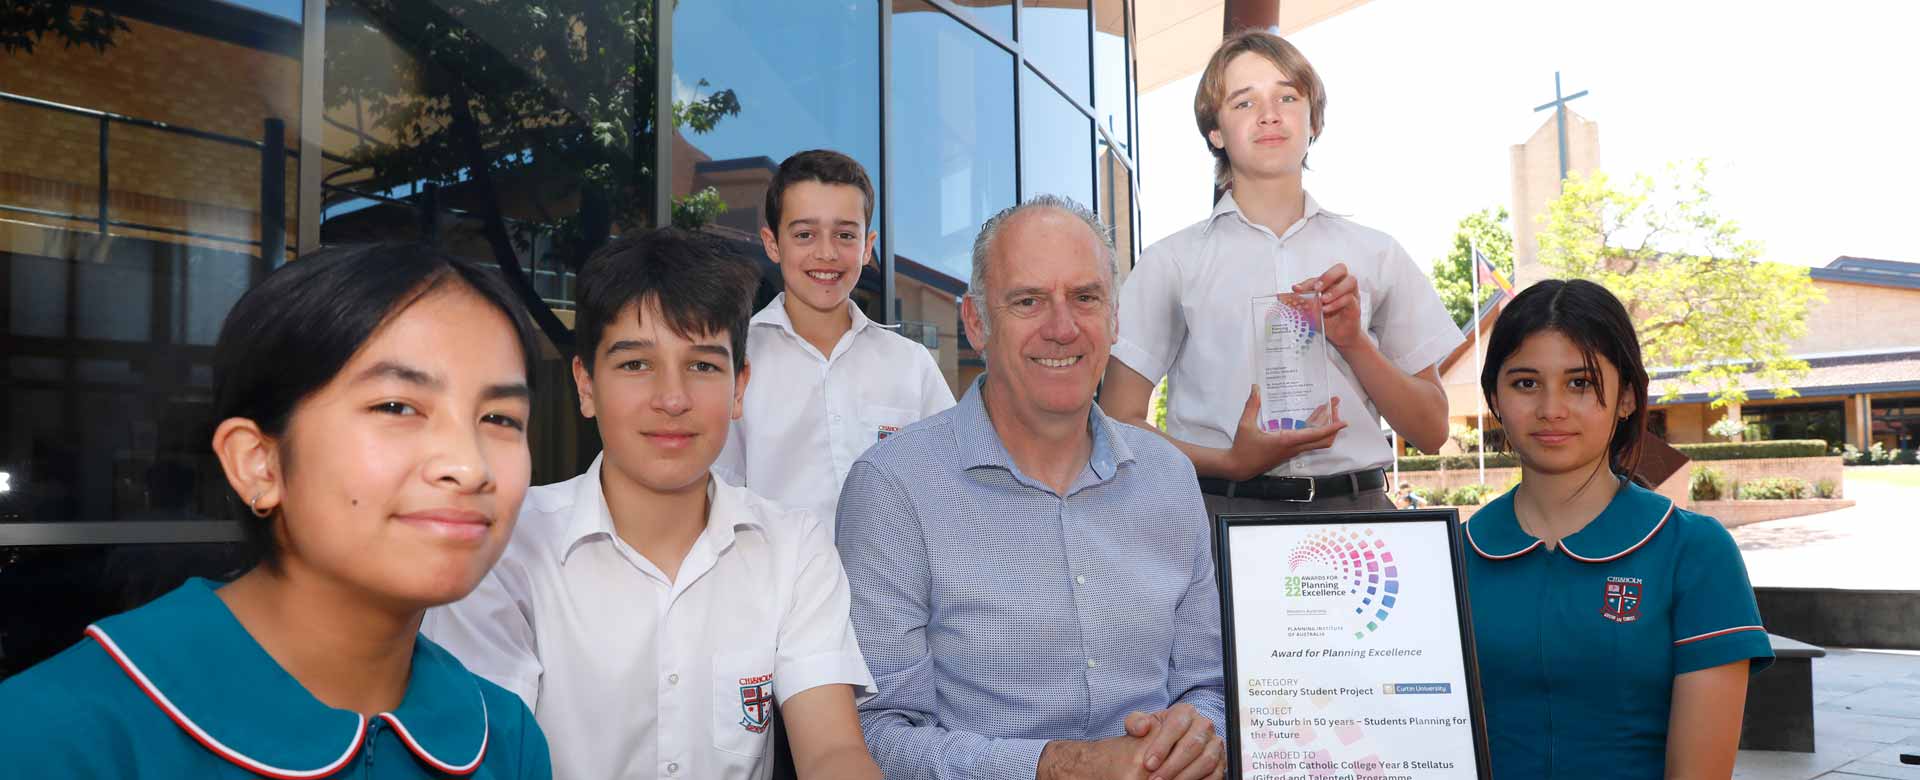 Students win state award for planning their future suburb